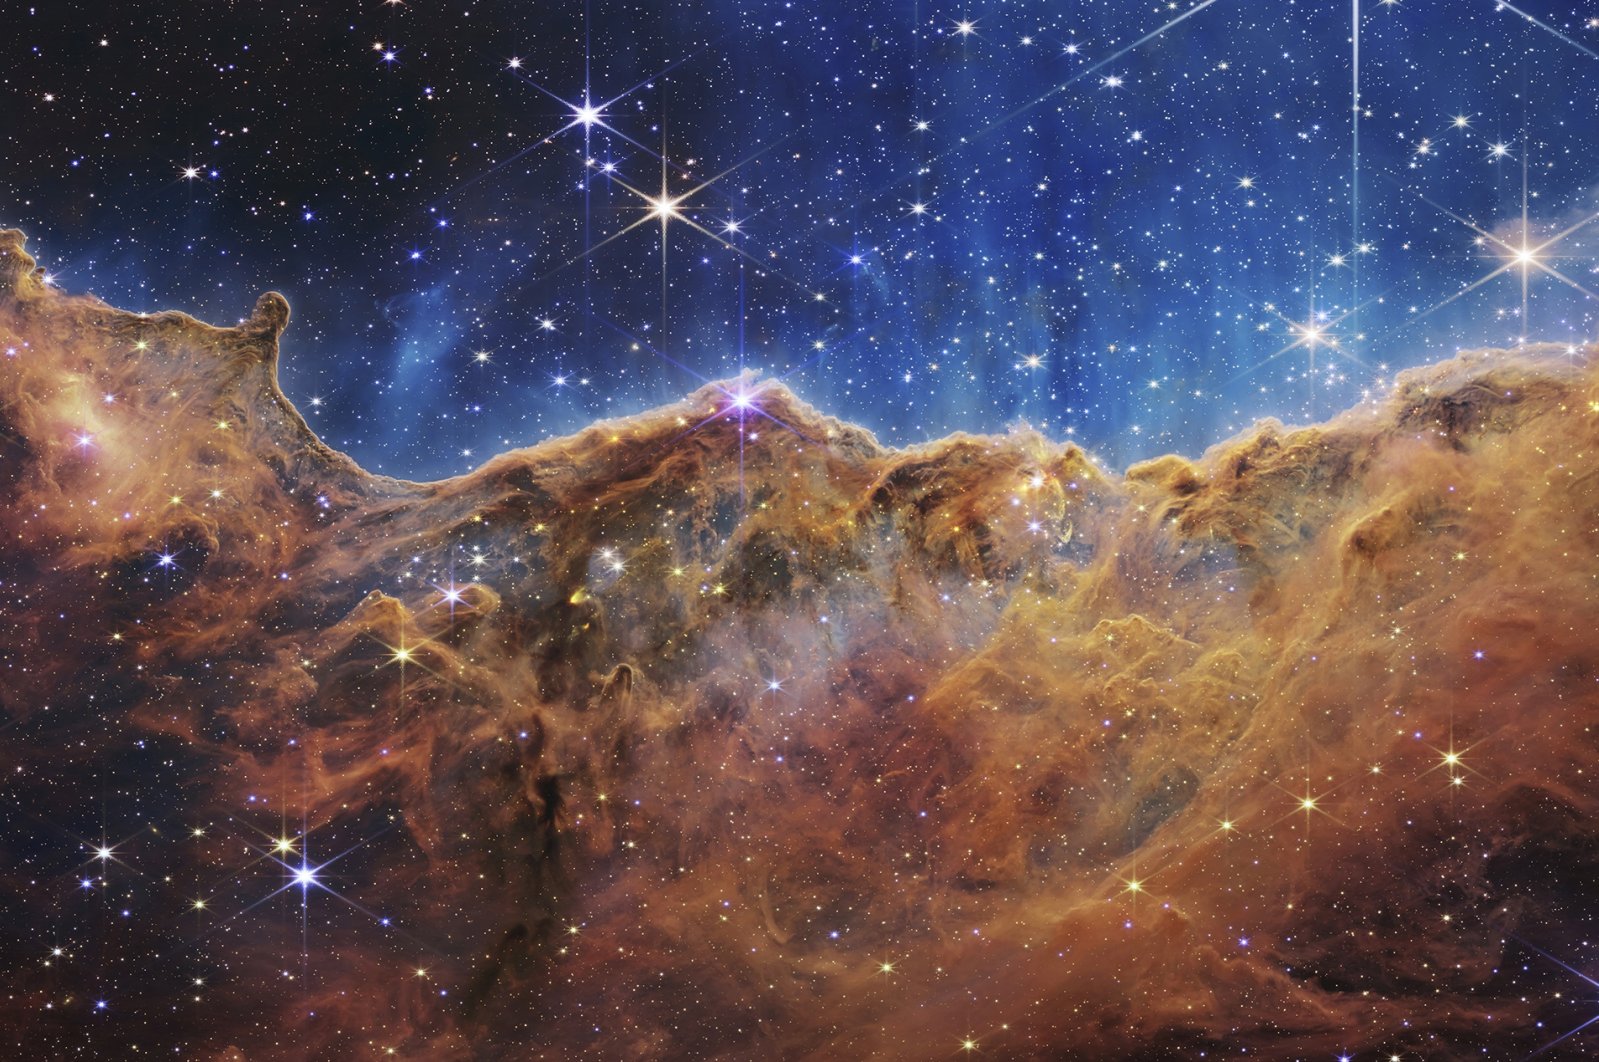 The edge of a nearby, young, star-forming region NGC 3324 in the Carina Nebula, July 12, 2022. (AP Photo)